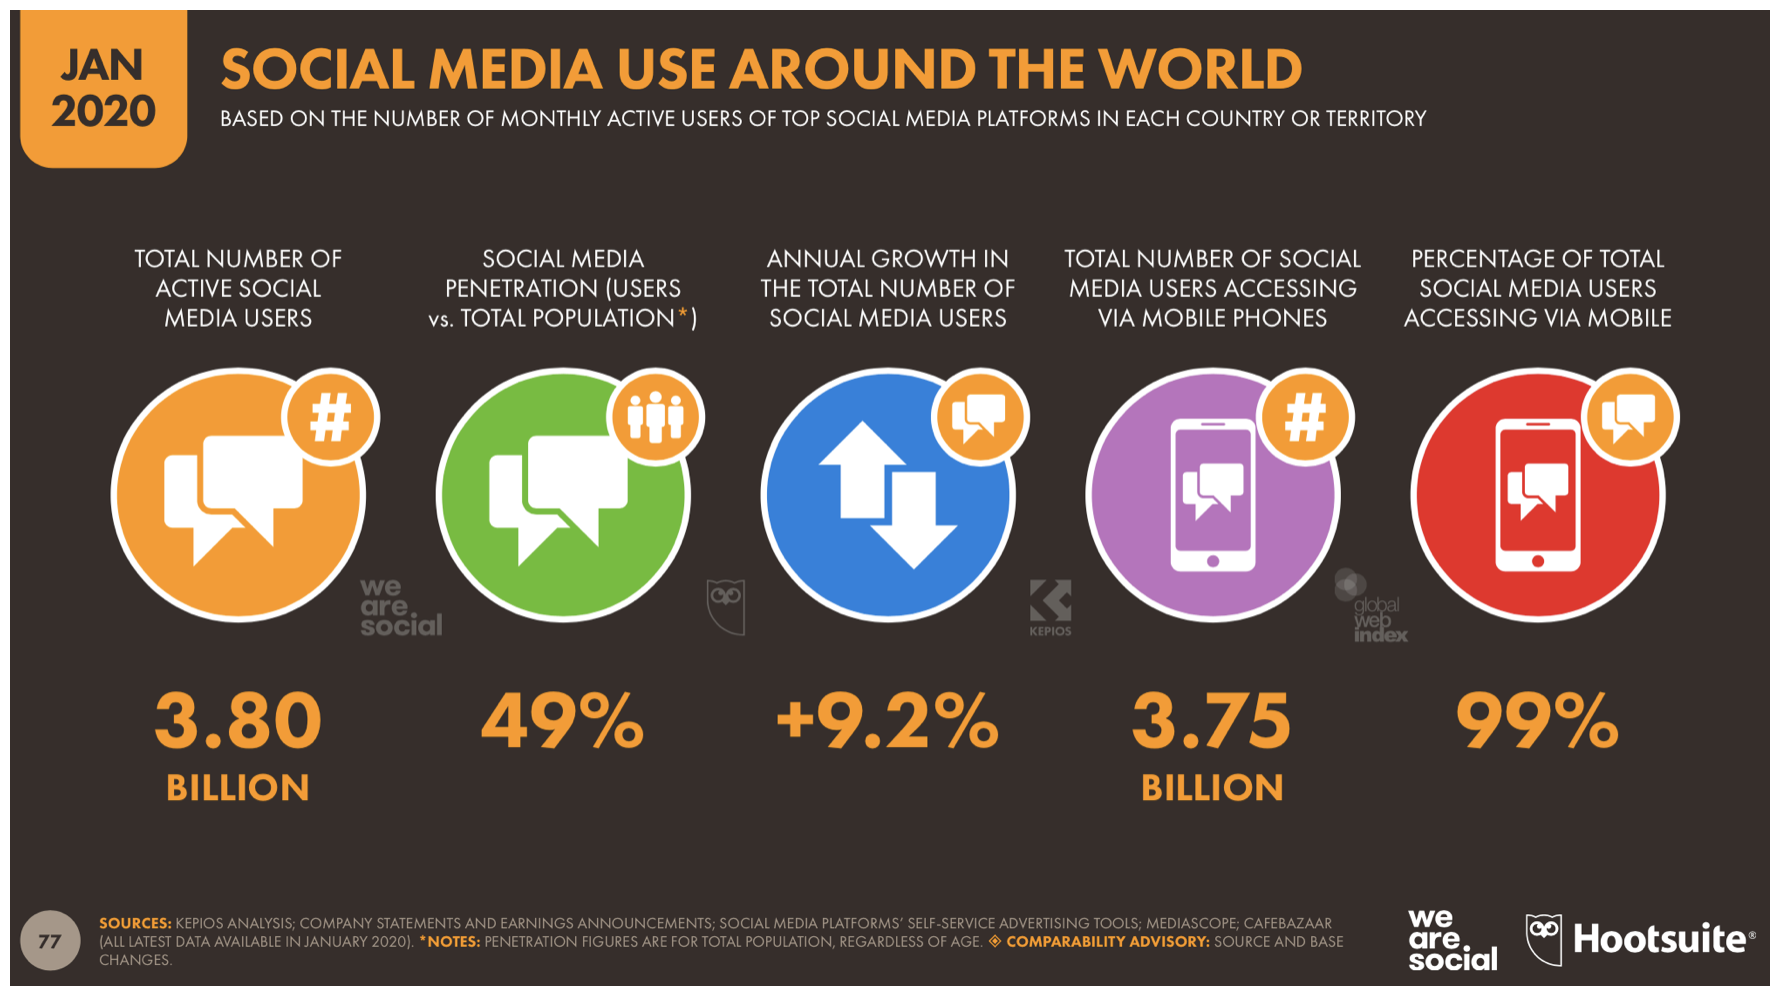 summary of global social media users around the world